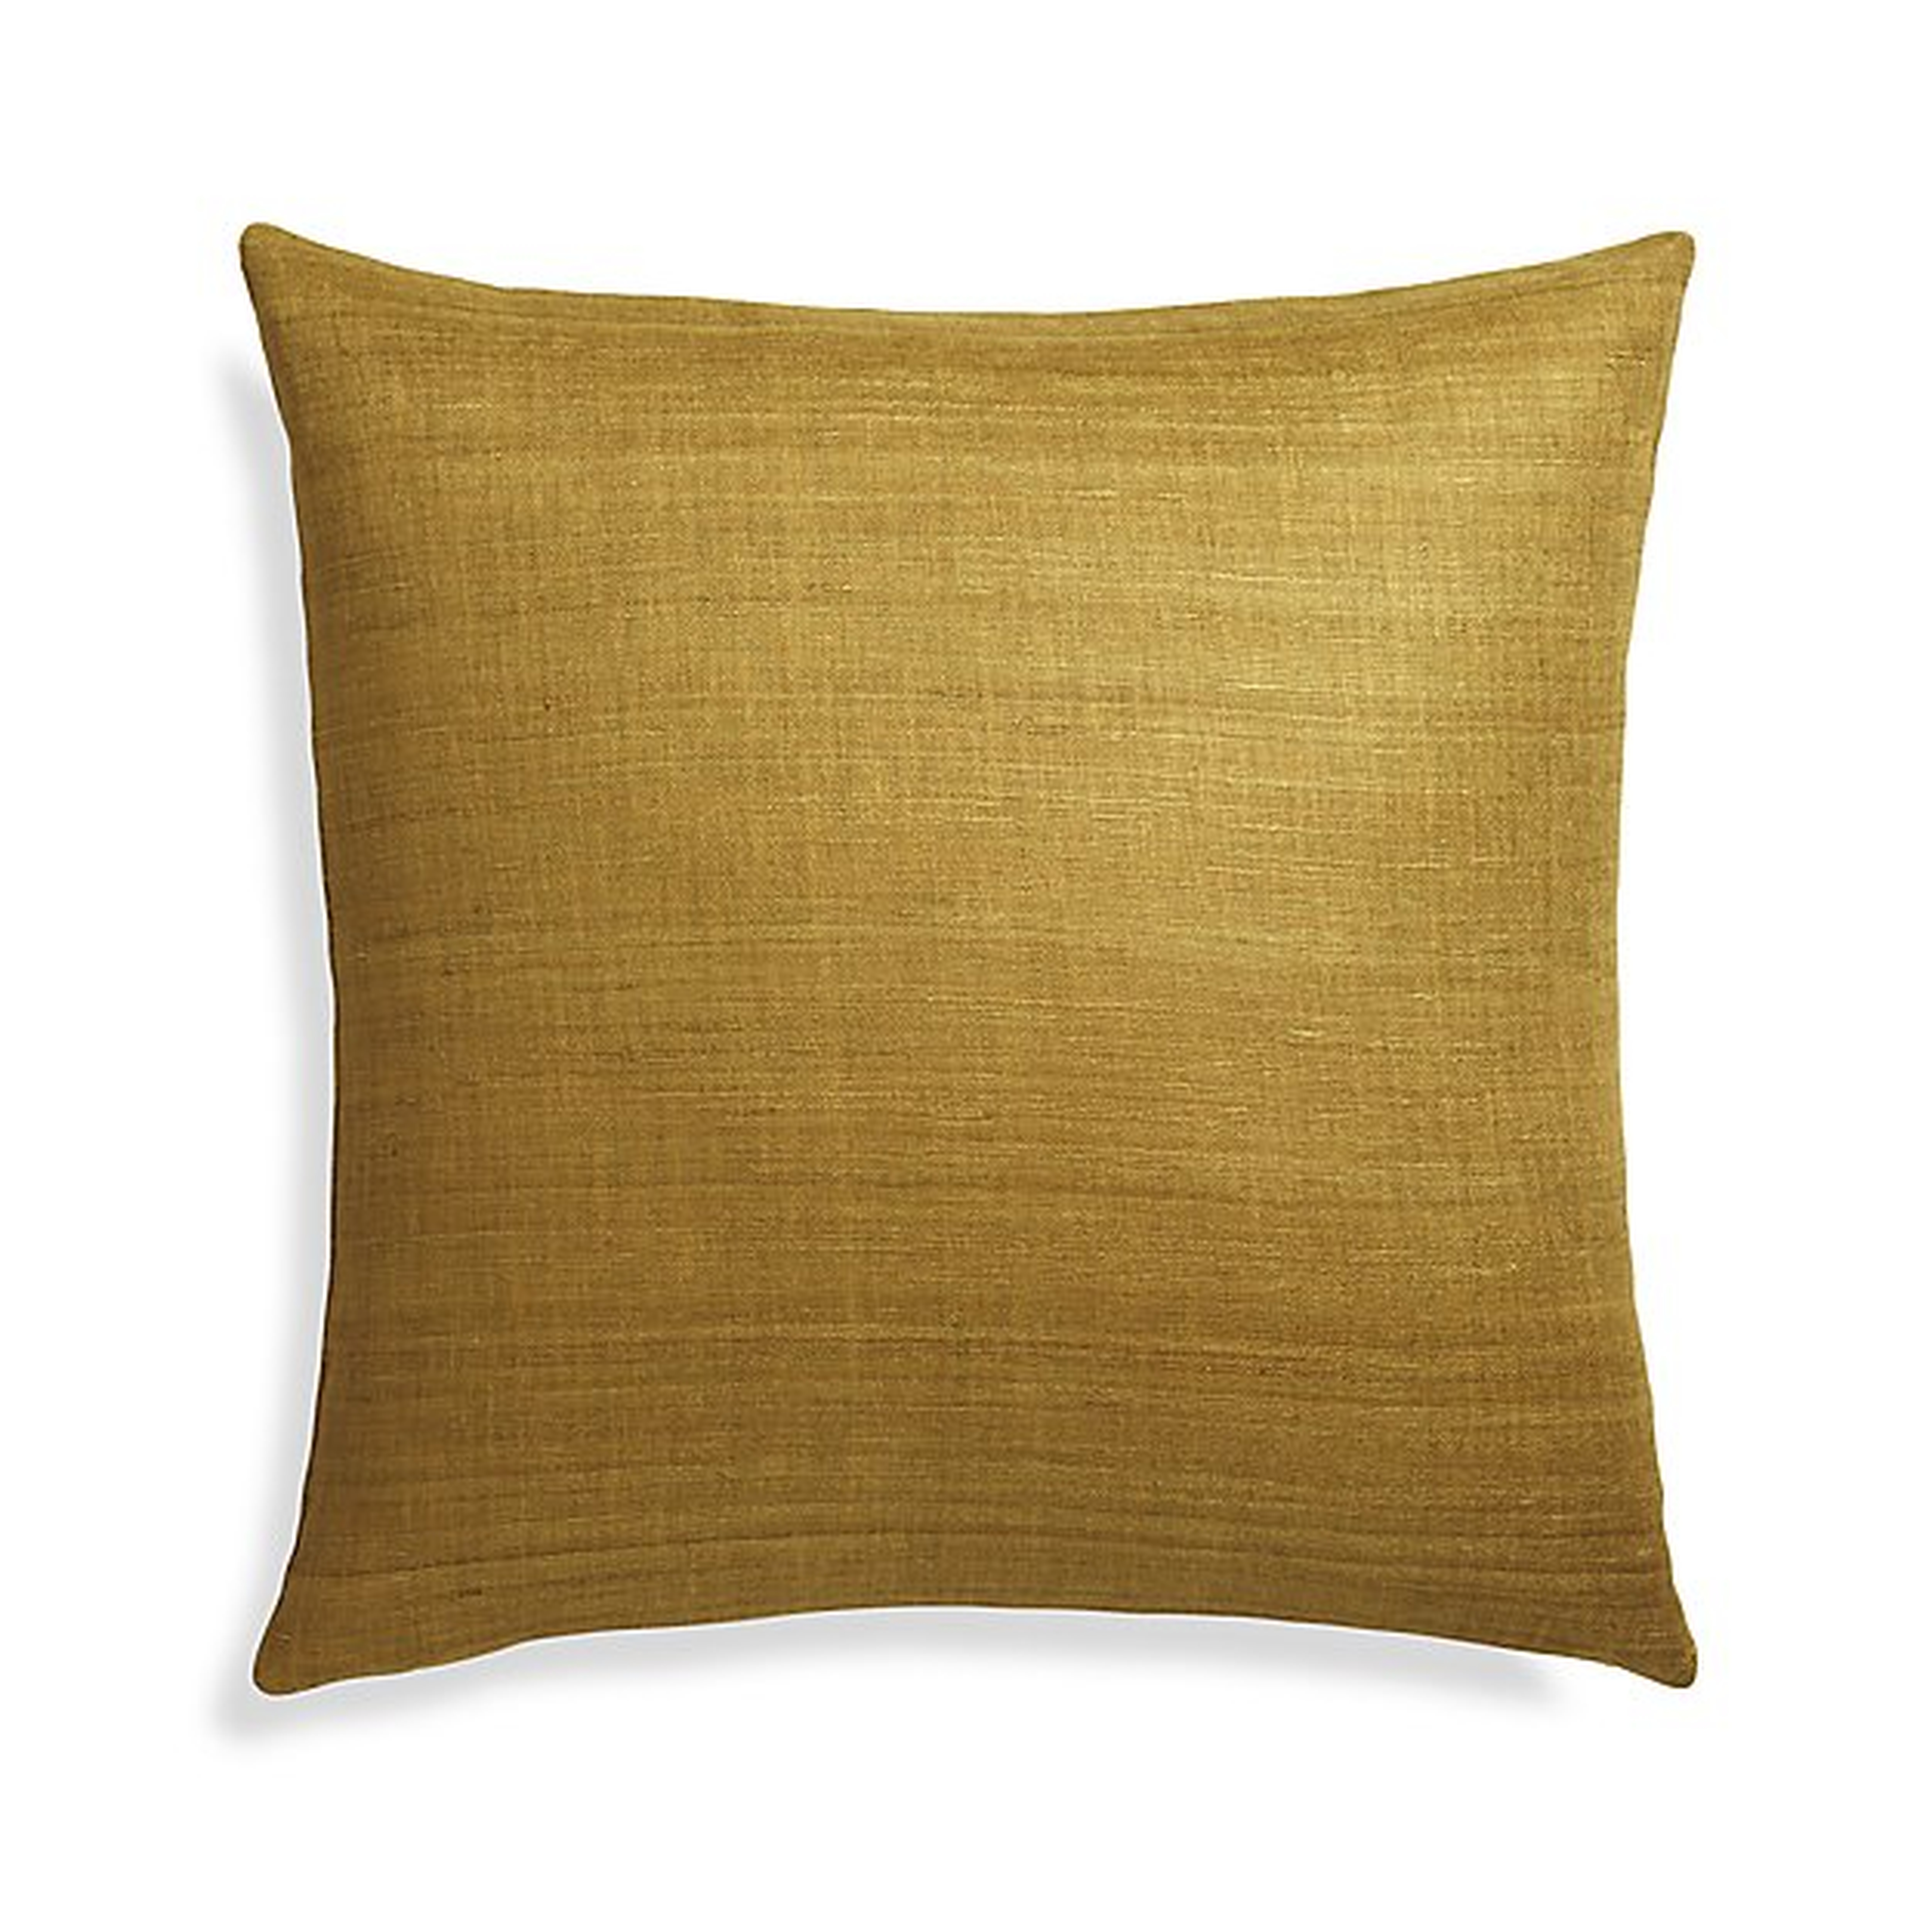 Michaela Gold 20" Pillow with Down-Alternative Insert - Crate and Barrel